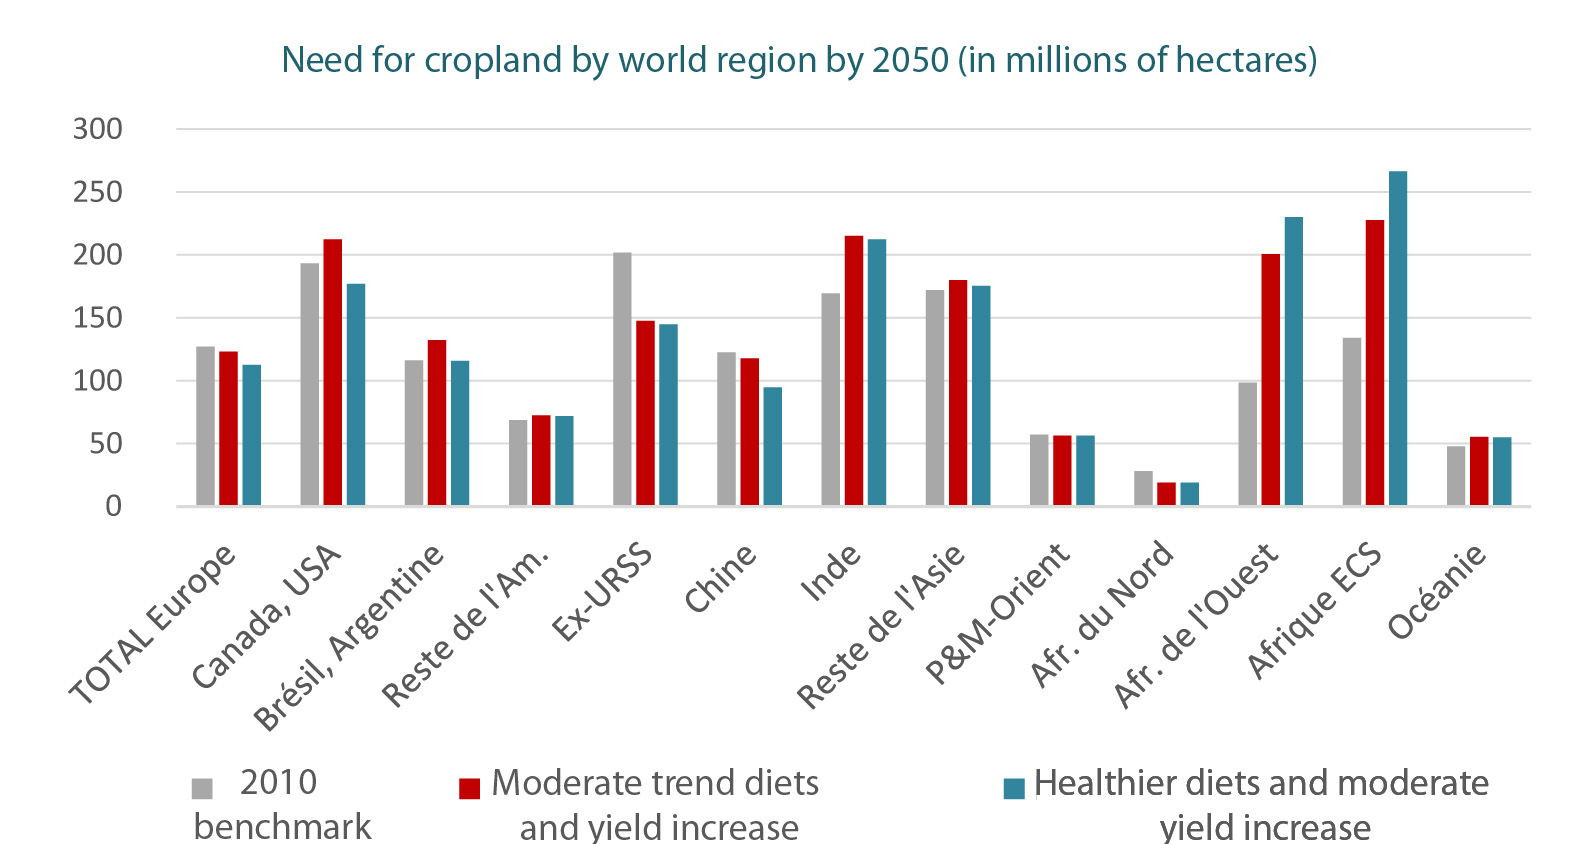 Need for cropland by world region by 2050 (in millions of hectares)